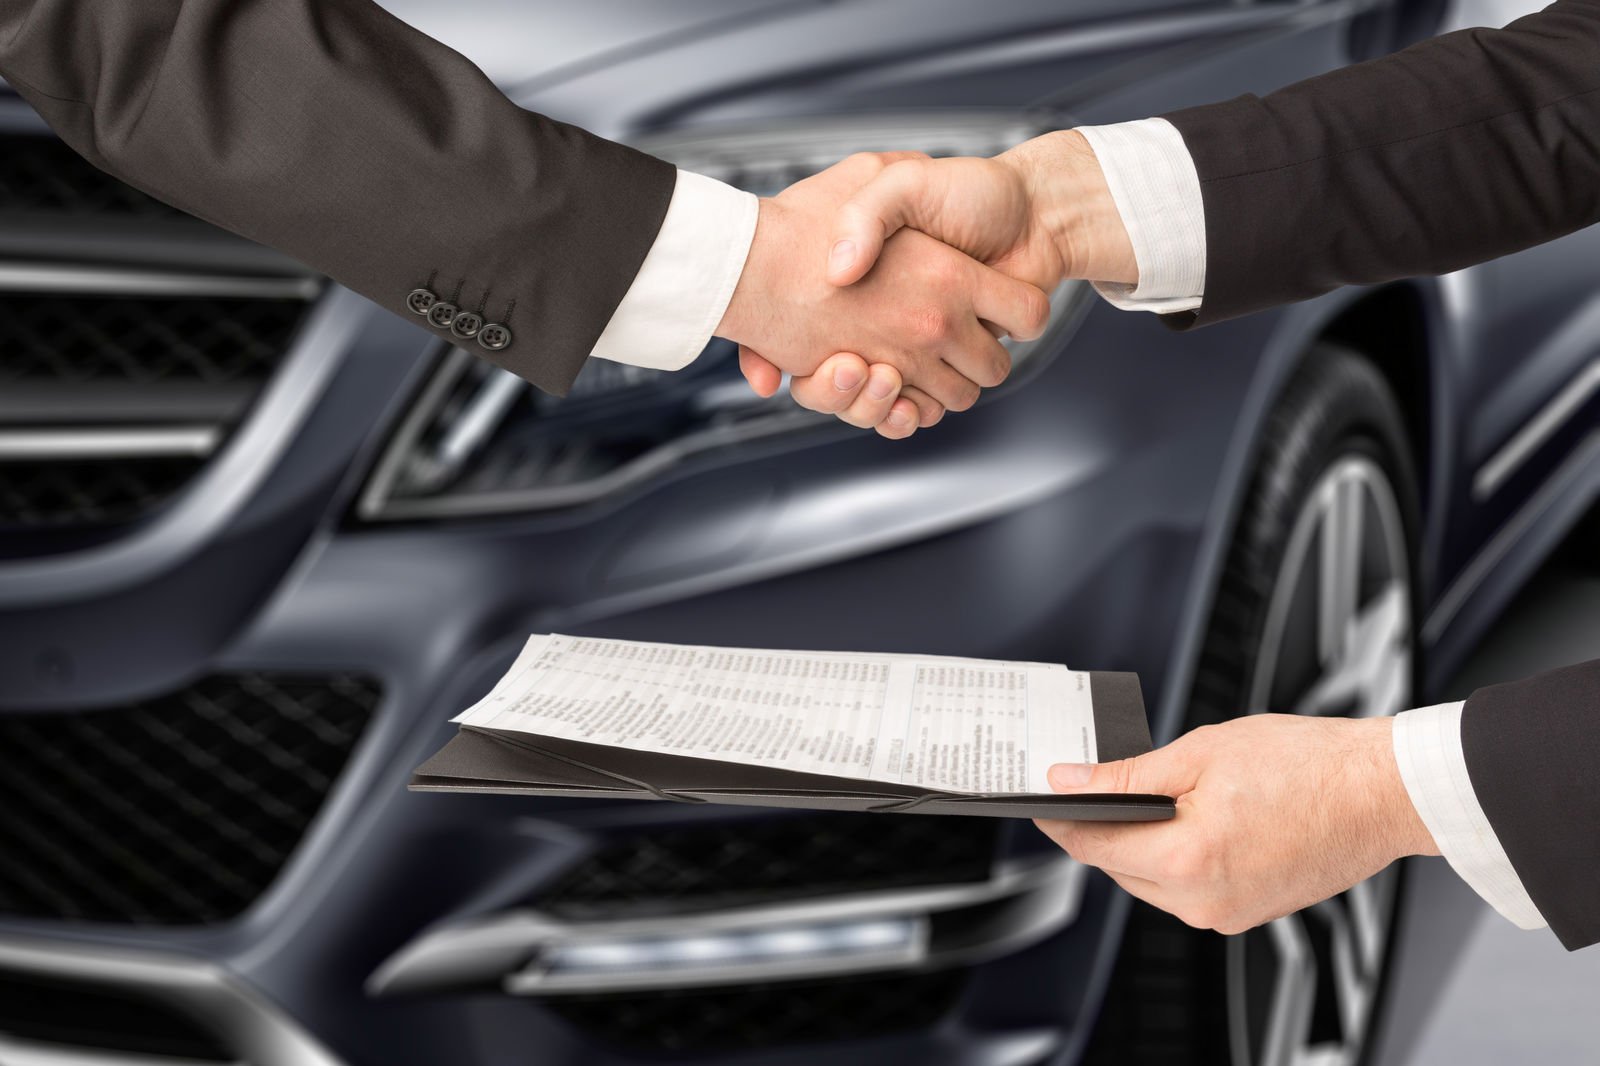 Do you need insurance to transfer a car title?